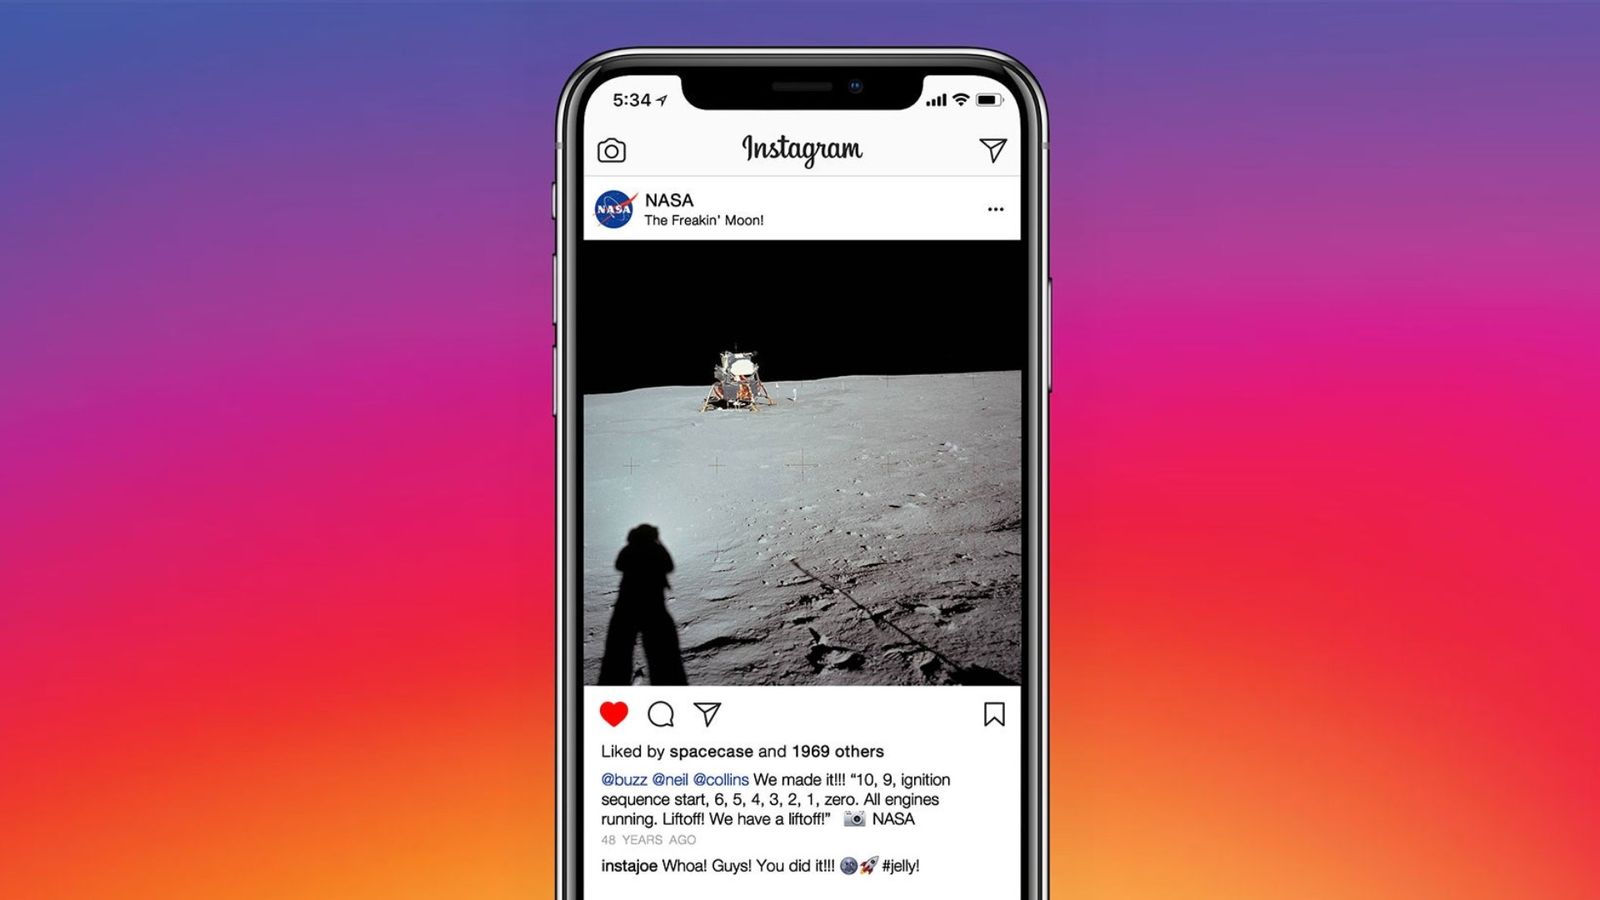 Instagram close friends posts - An image of the Instagram home feed on an iPhone